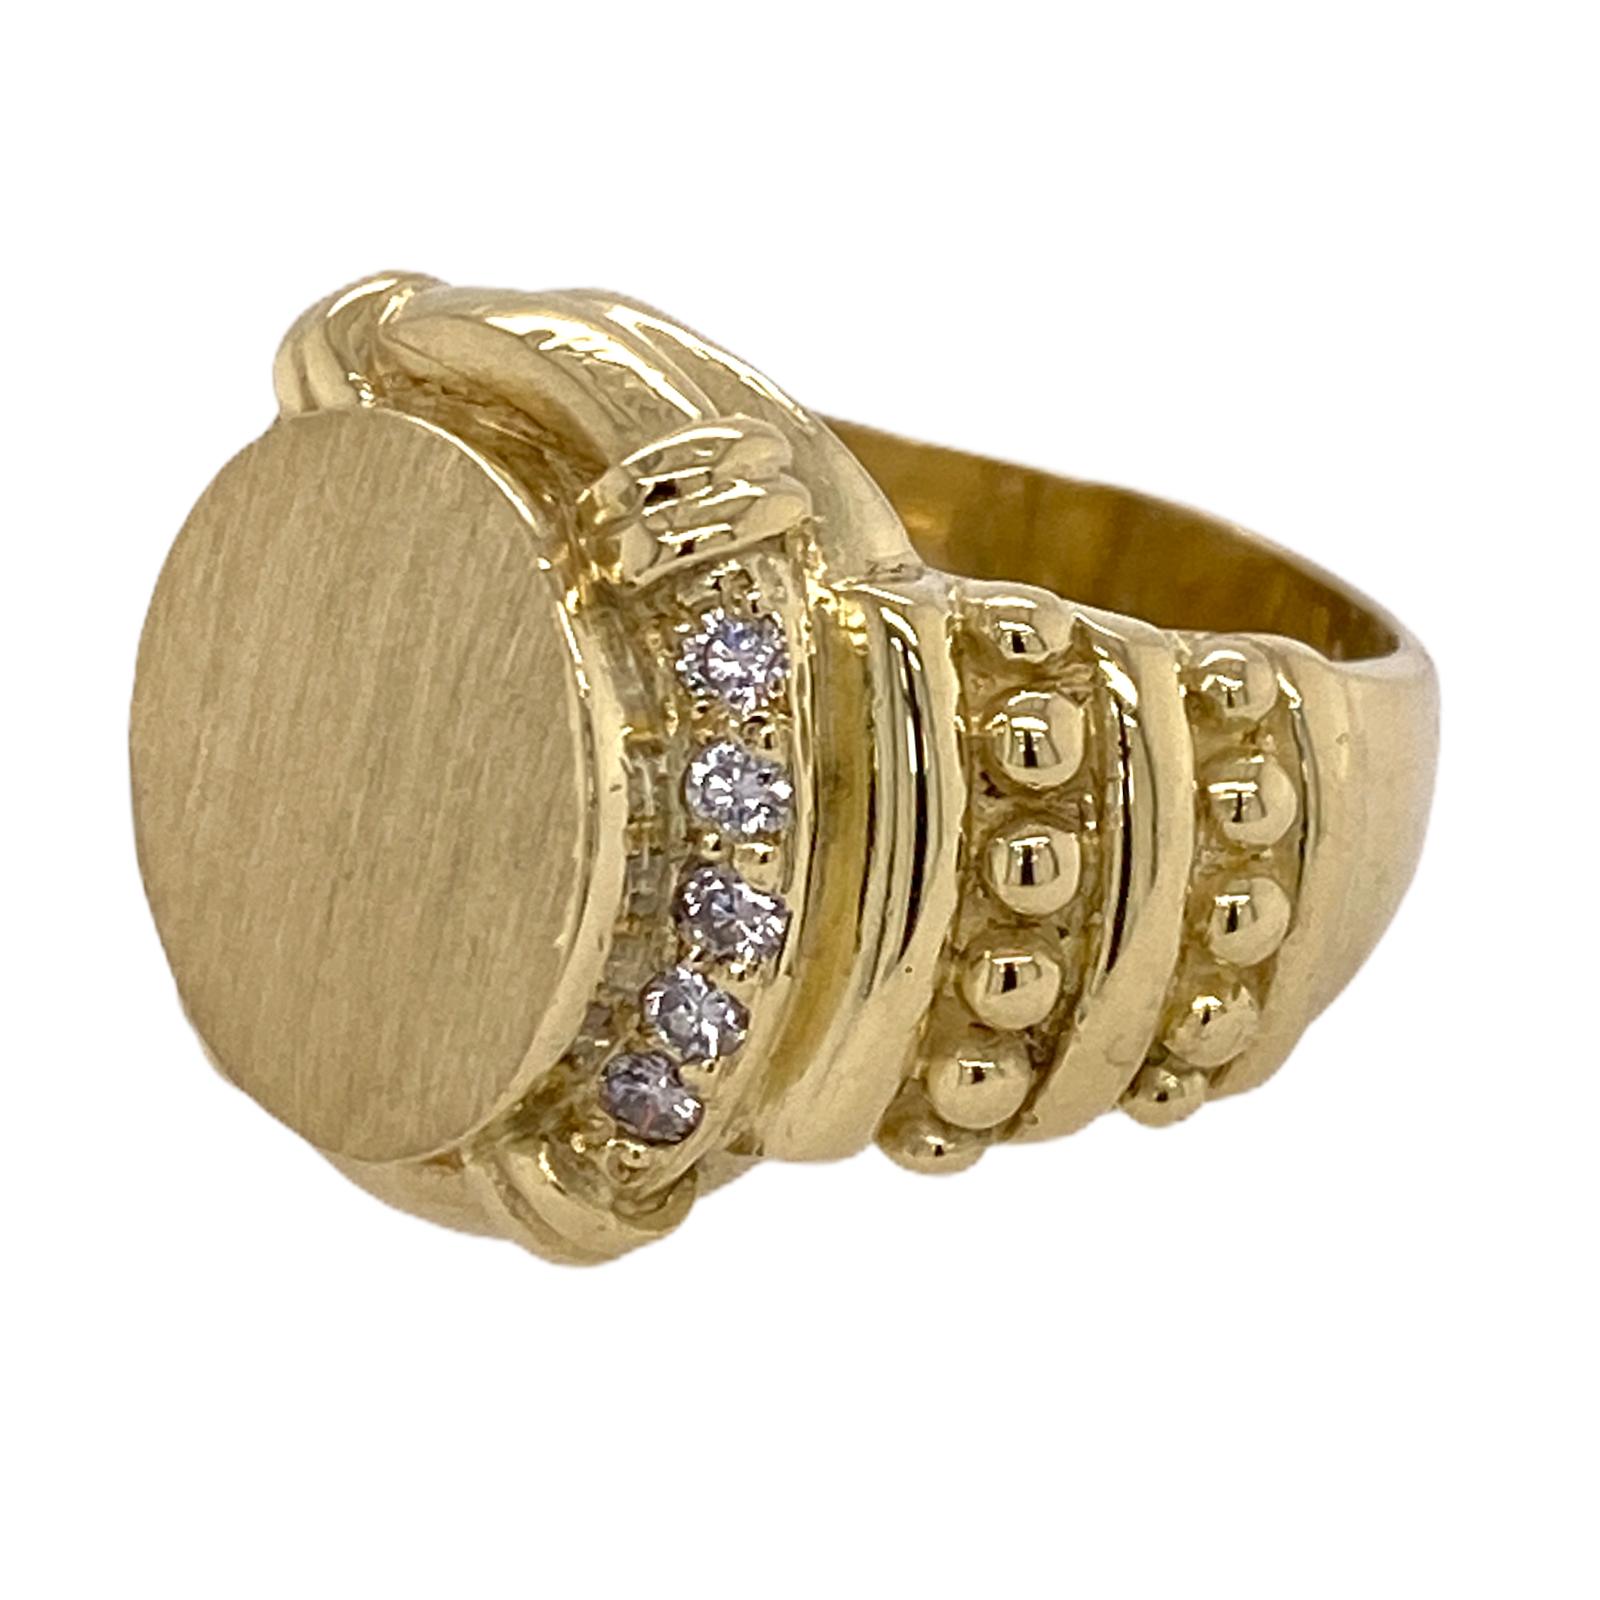 Diamond signet ring fashioned in 18 karat yellow gold. The oval flat top ring is ready for engraving and features round brilliant cut diamond accents weighing .15 carat total weight. The ring measure 11.5 x 12.5mm on top (for engraving), 17mm in